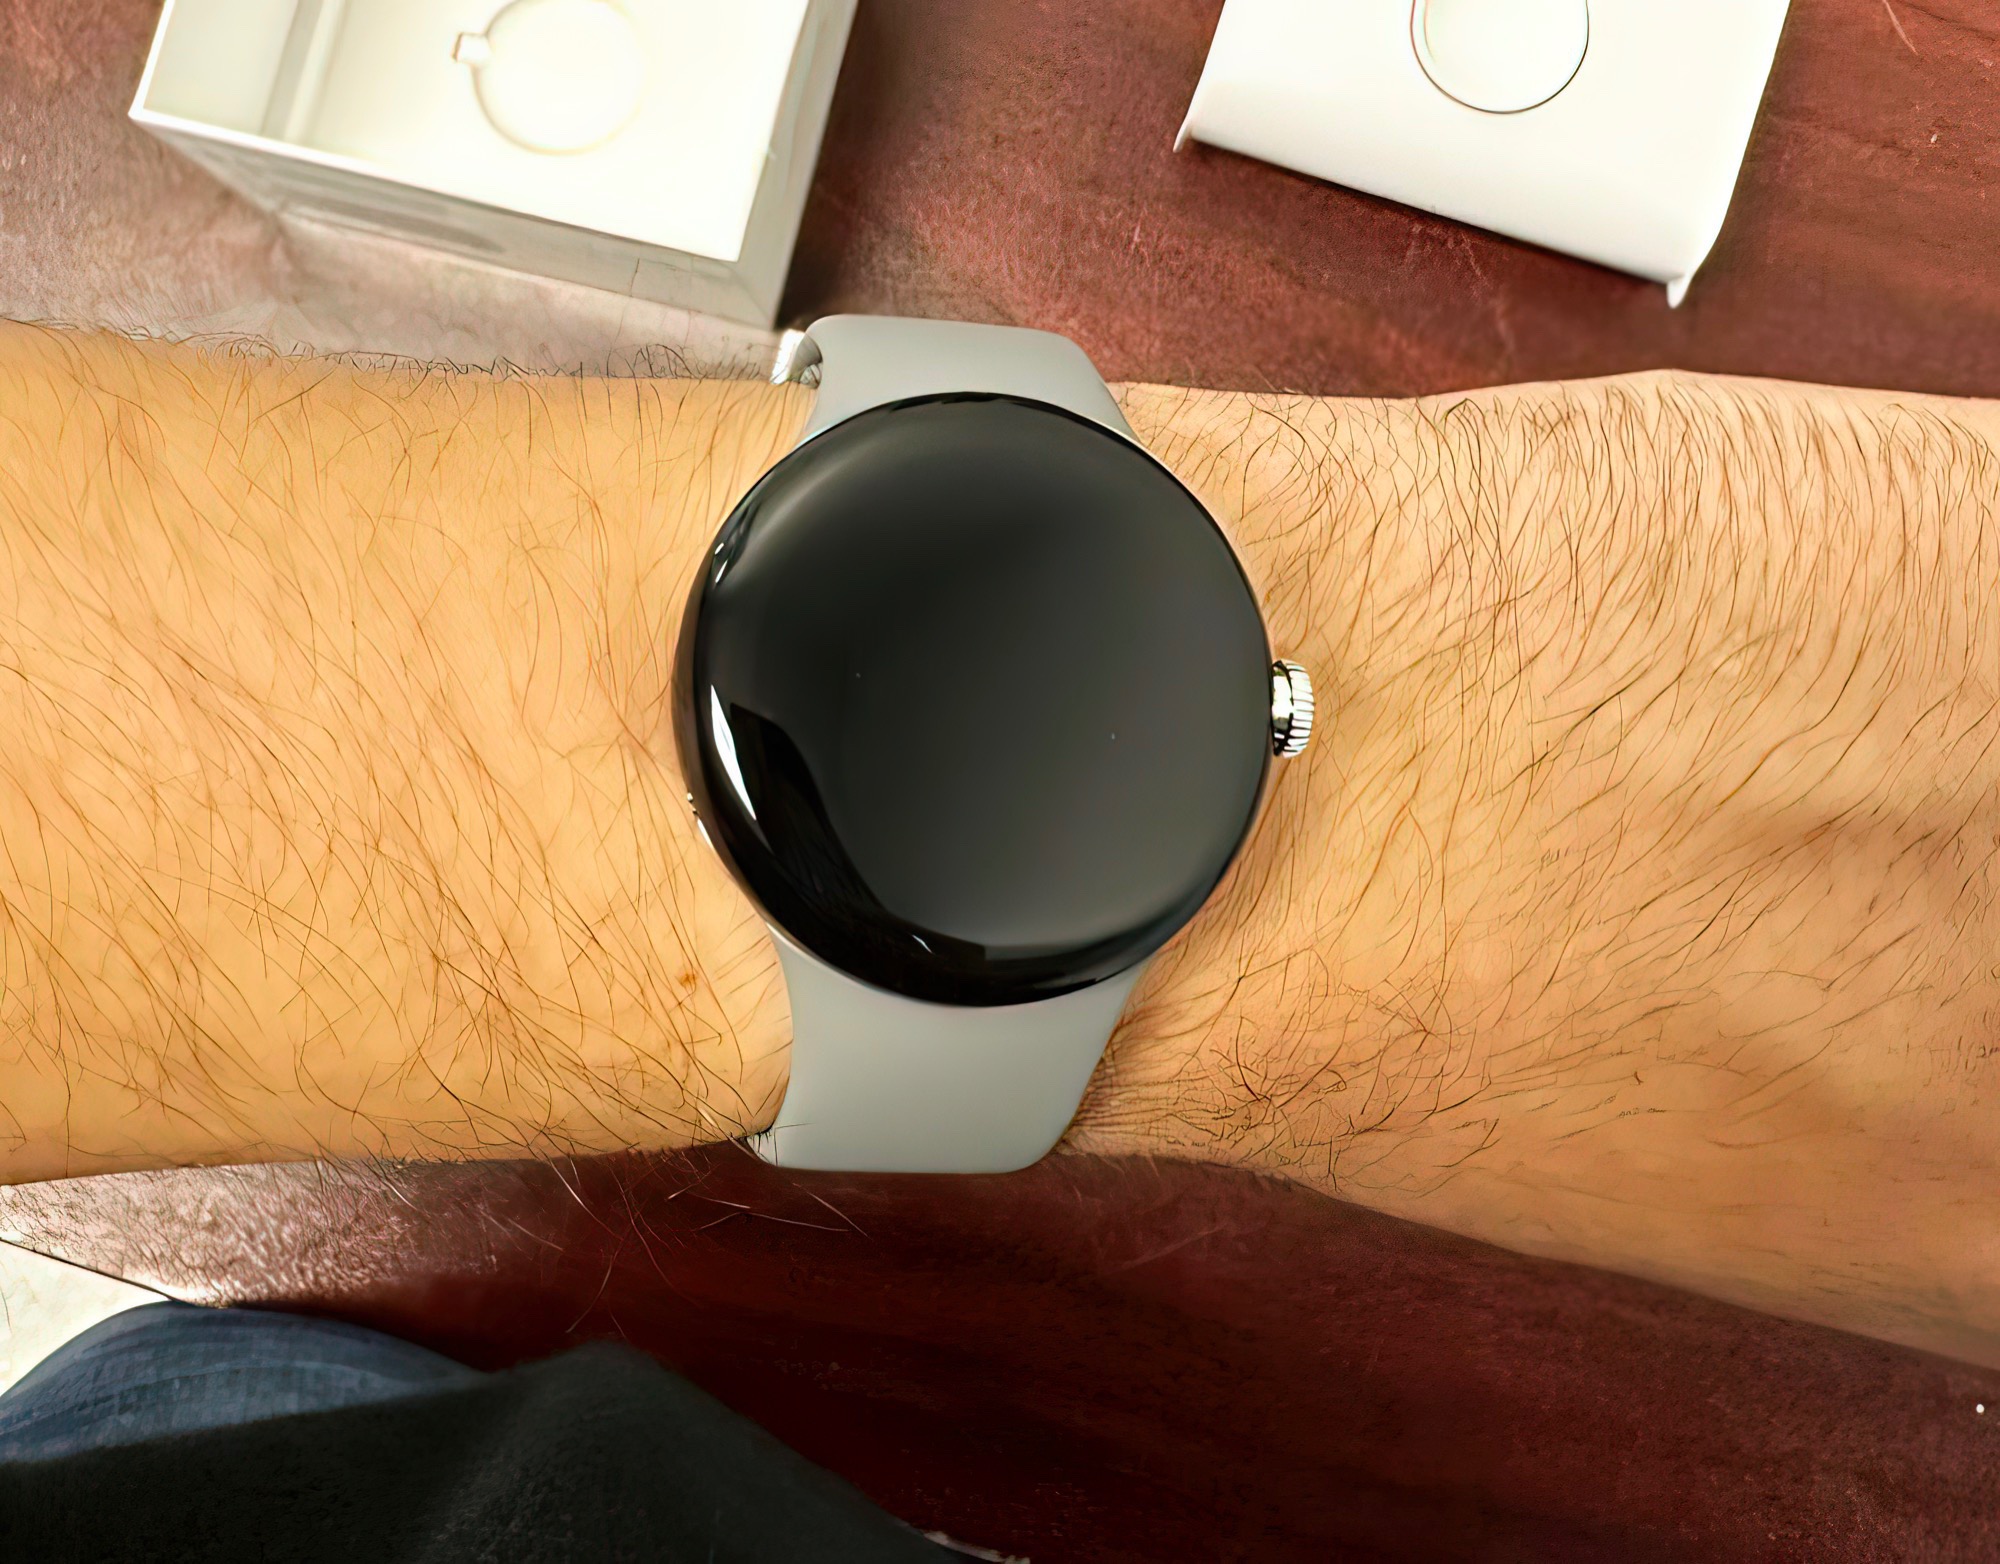 Pixel News as photos watch NotebookCheck.net prices Unboxing - leak band show Google Watch: bezels thick display